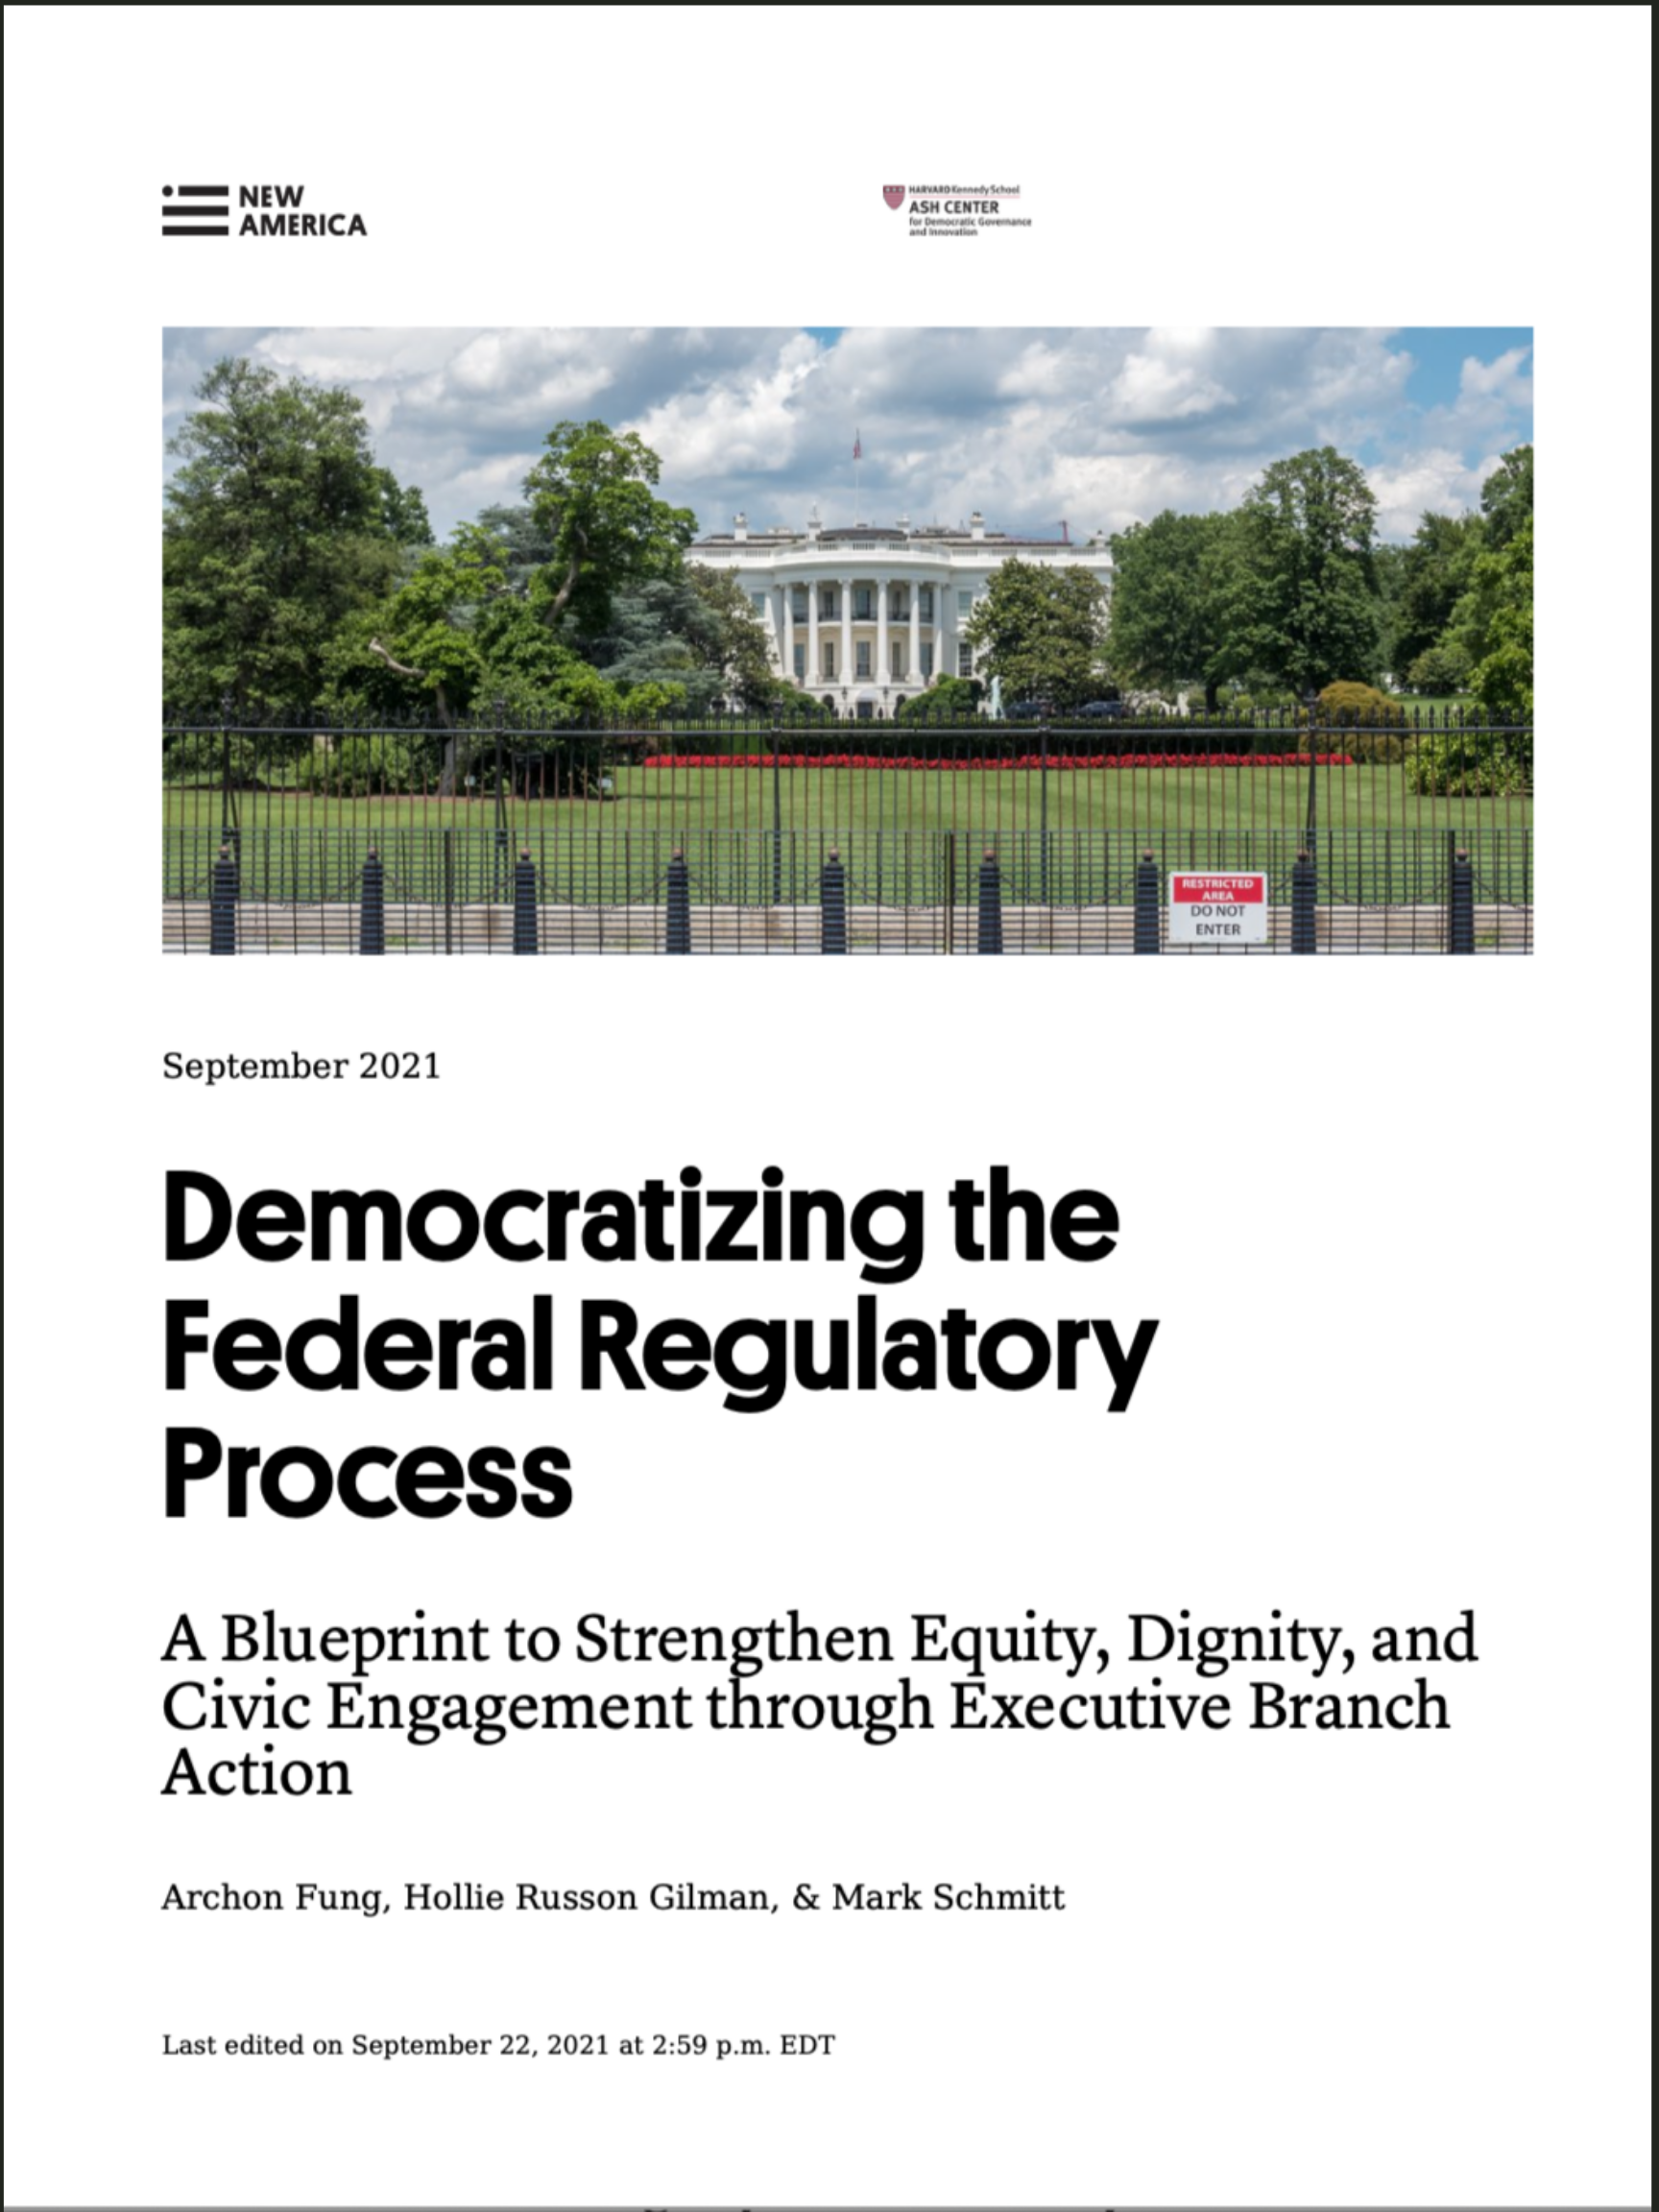 Democratizing the Federal Regulatory Process: A Blueprint to Strengthen Equity, Dignity, and Civic Engagement through Executive Branch Action